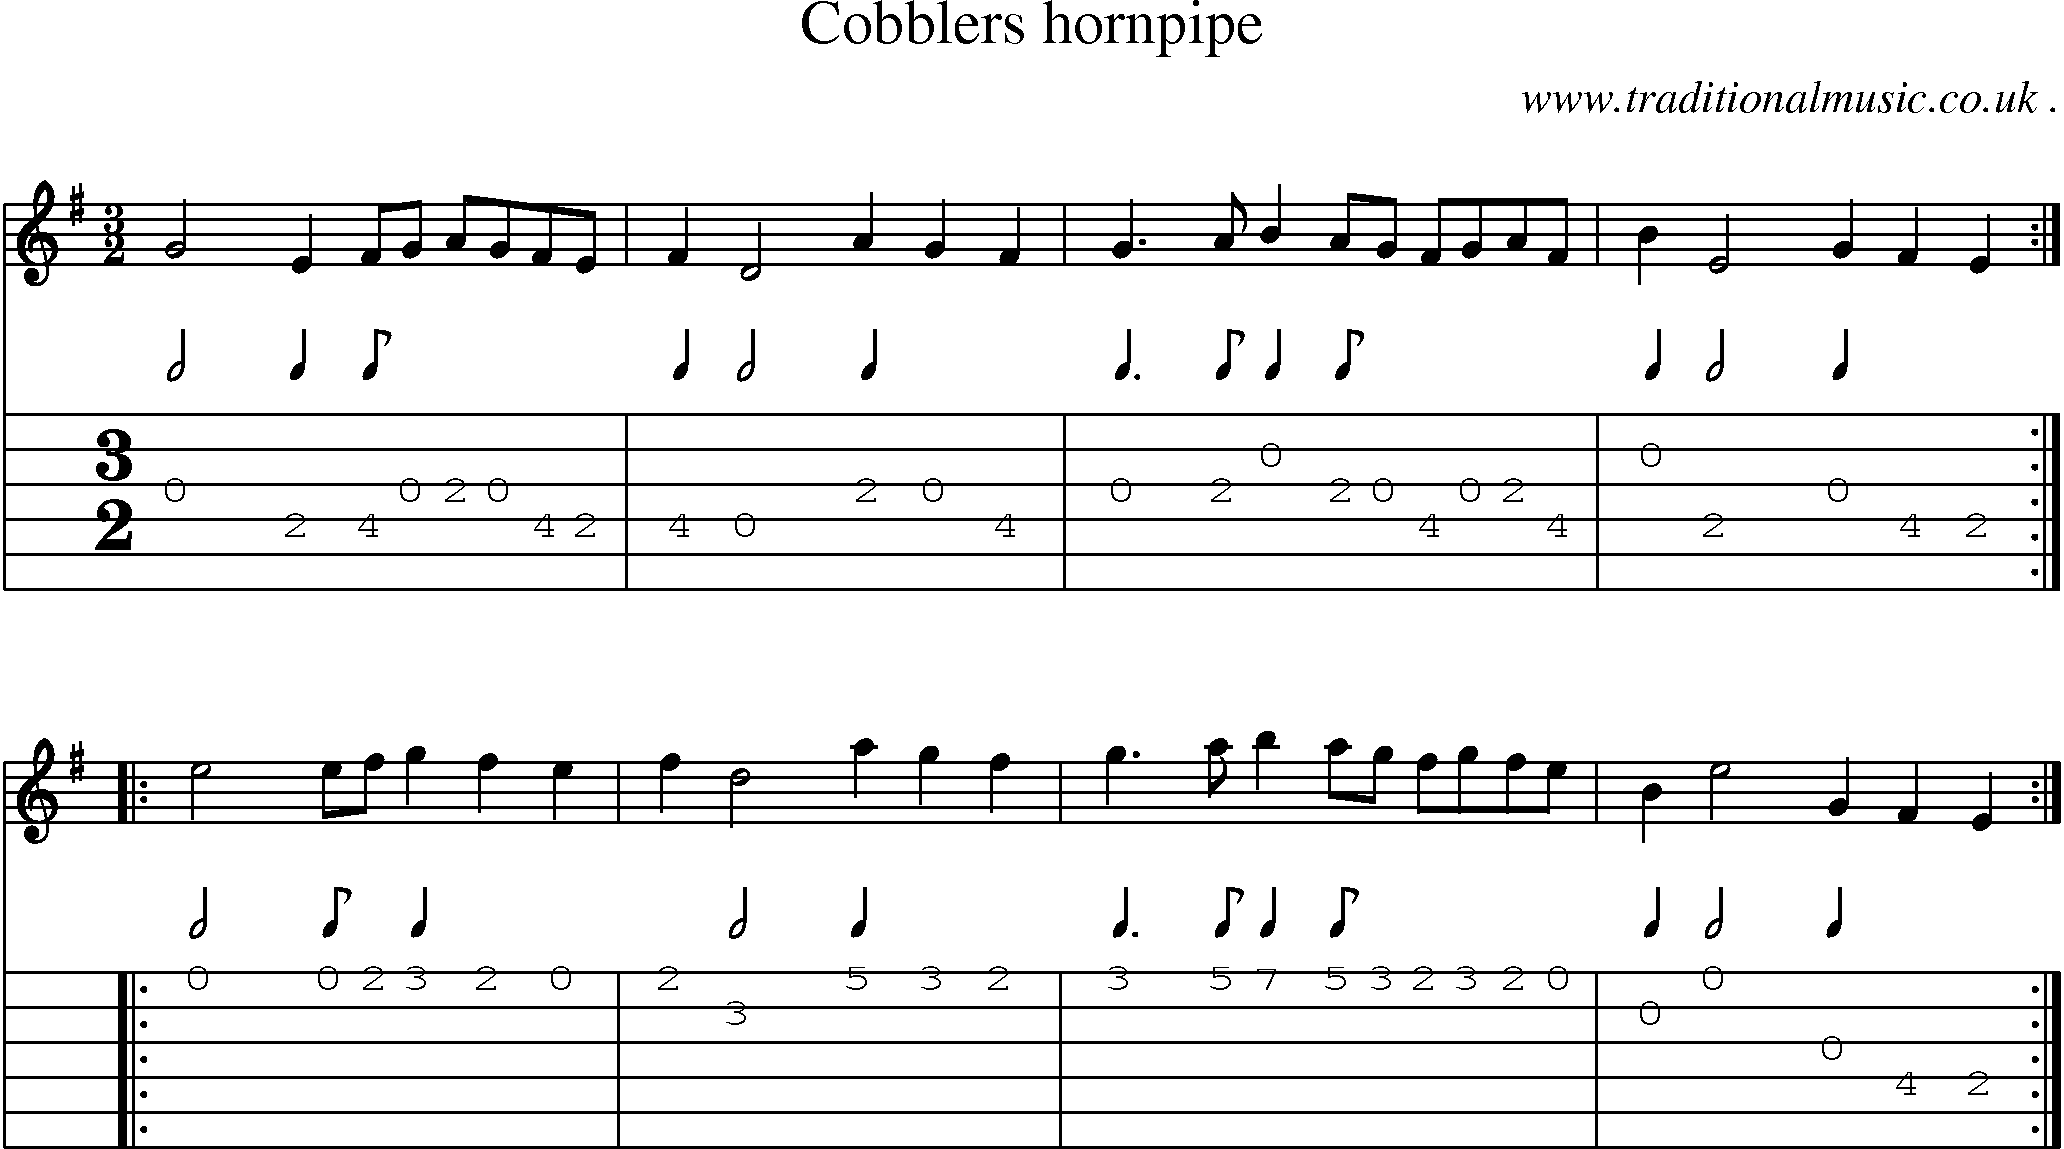 Sheet-Music and Guitar Tabs for Cobblers hornpipe 